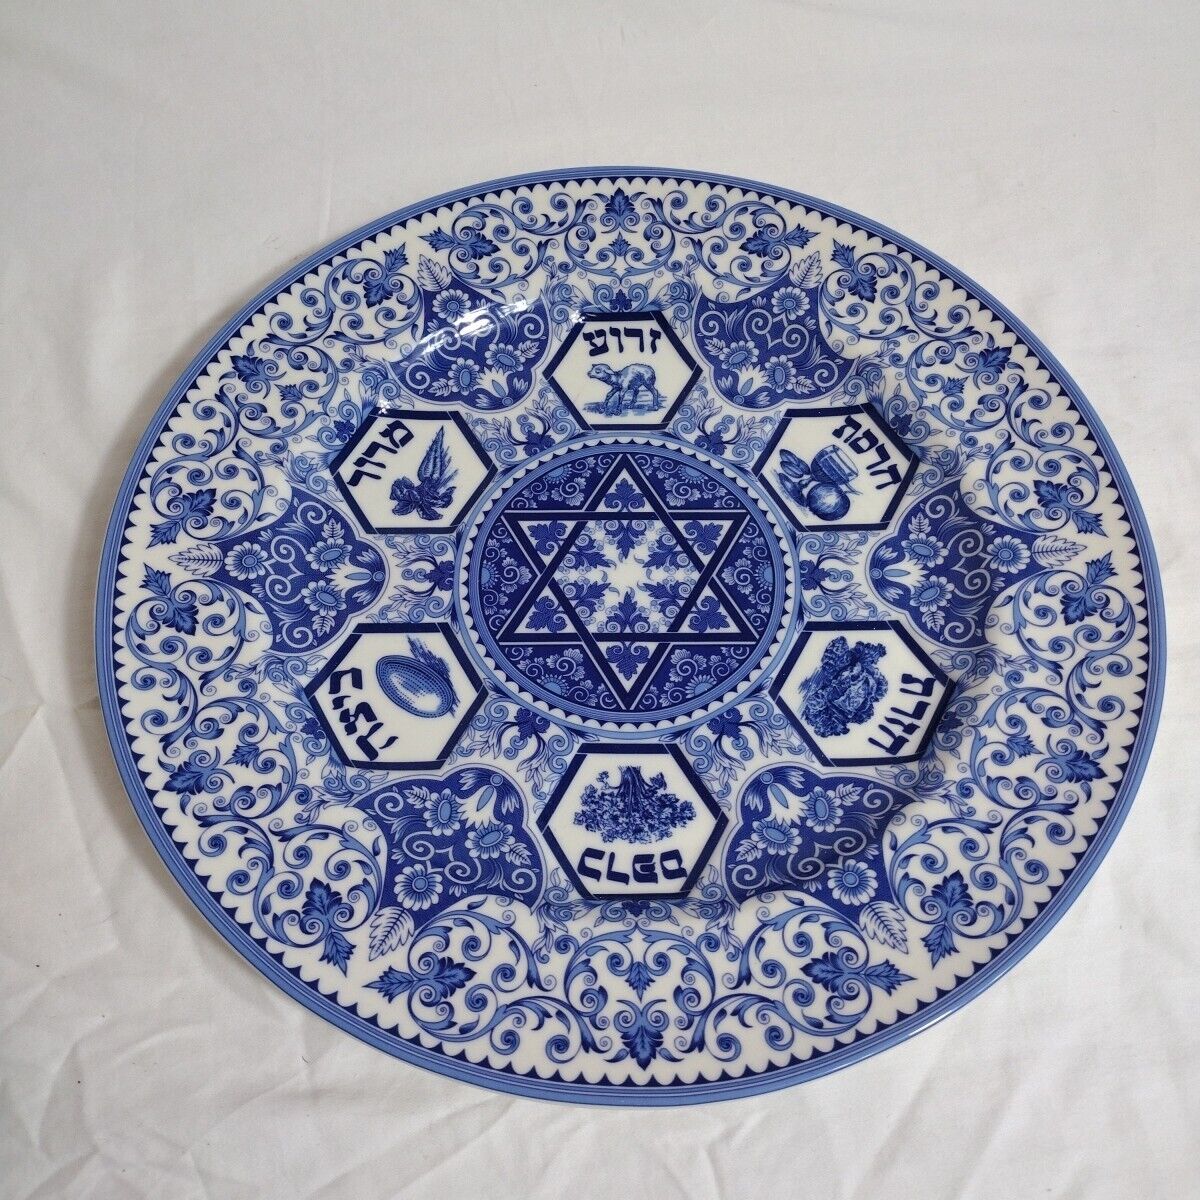 Spode Judaica Passover Seder Plate 12.5 Inch China Porcelain Blue And White